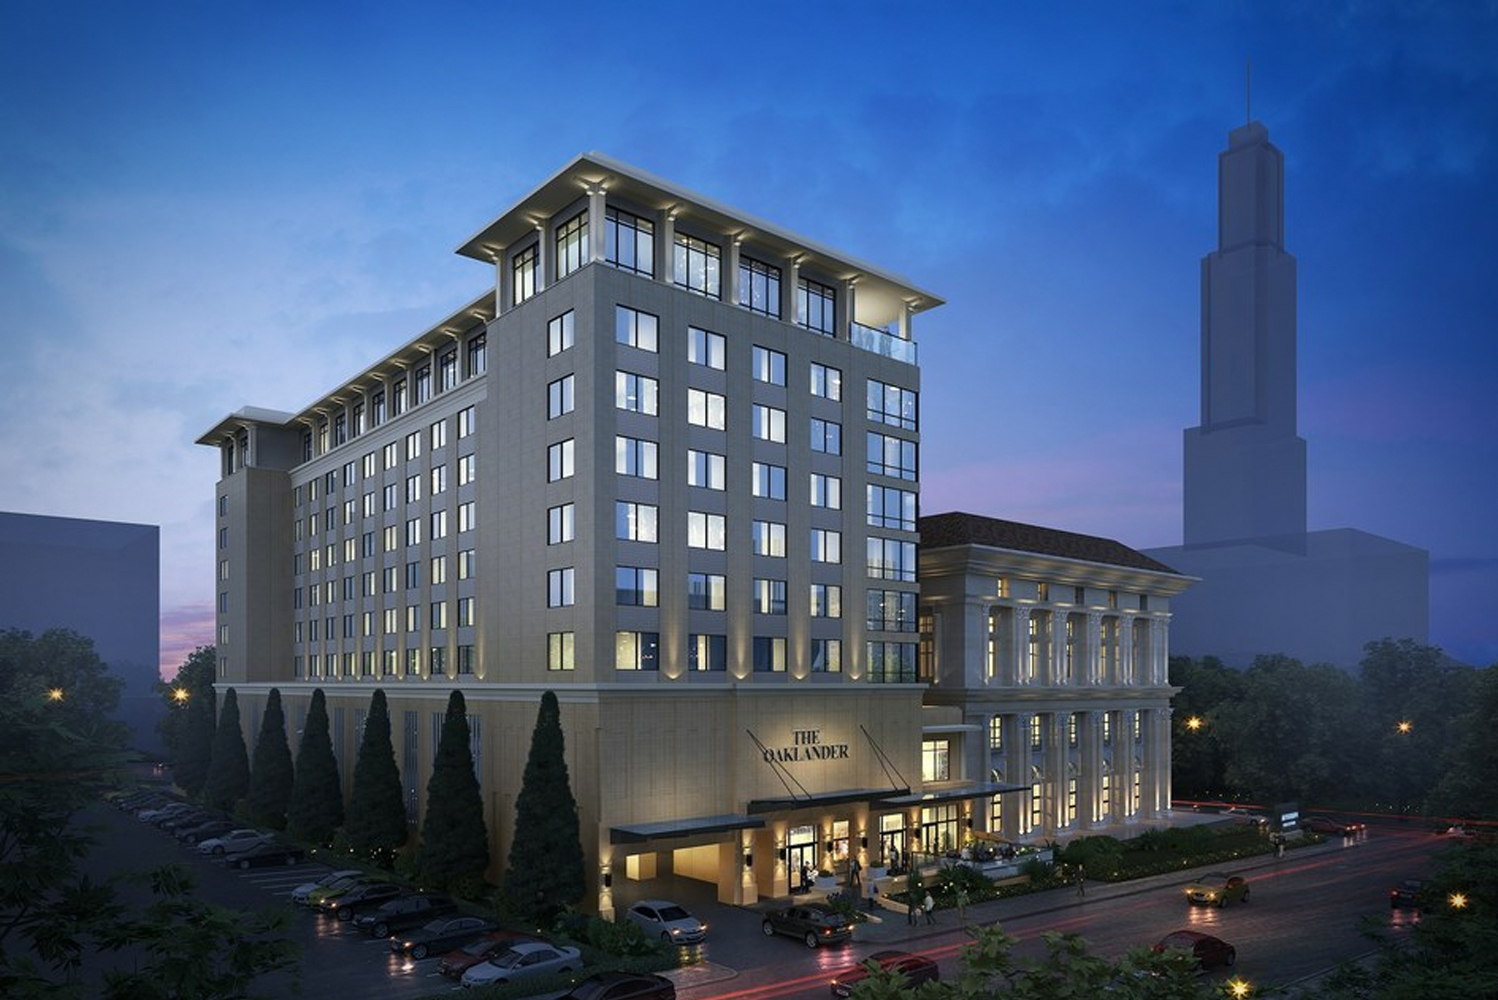 The Oaklander opens as first Autograph Collection Hotel in Pennsylvania